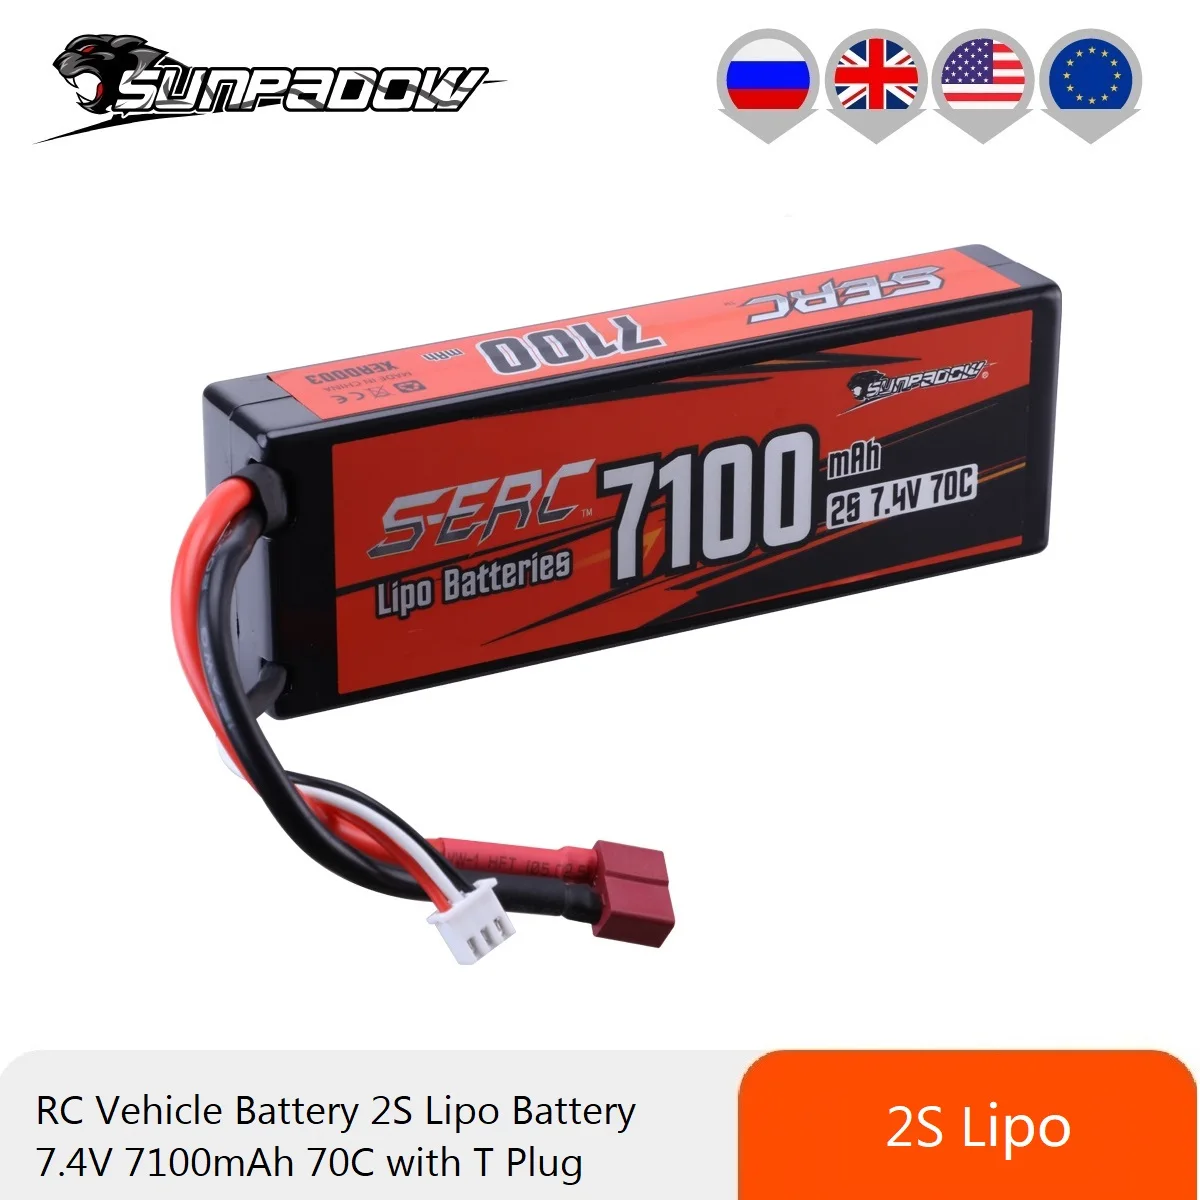 Sunpadow 2S 7.4V Lipo Battery for 7100mAh 70C Hard Case with T Plug Deans 4mm Bullet For RC Car Truck Tank Racing Hobby